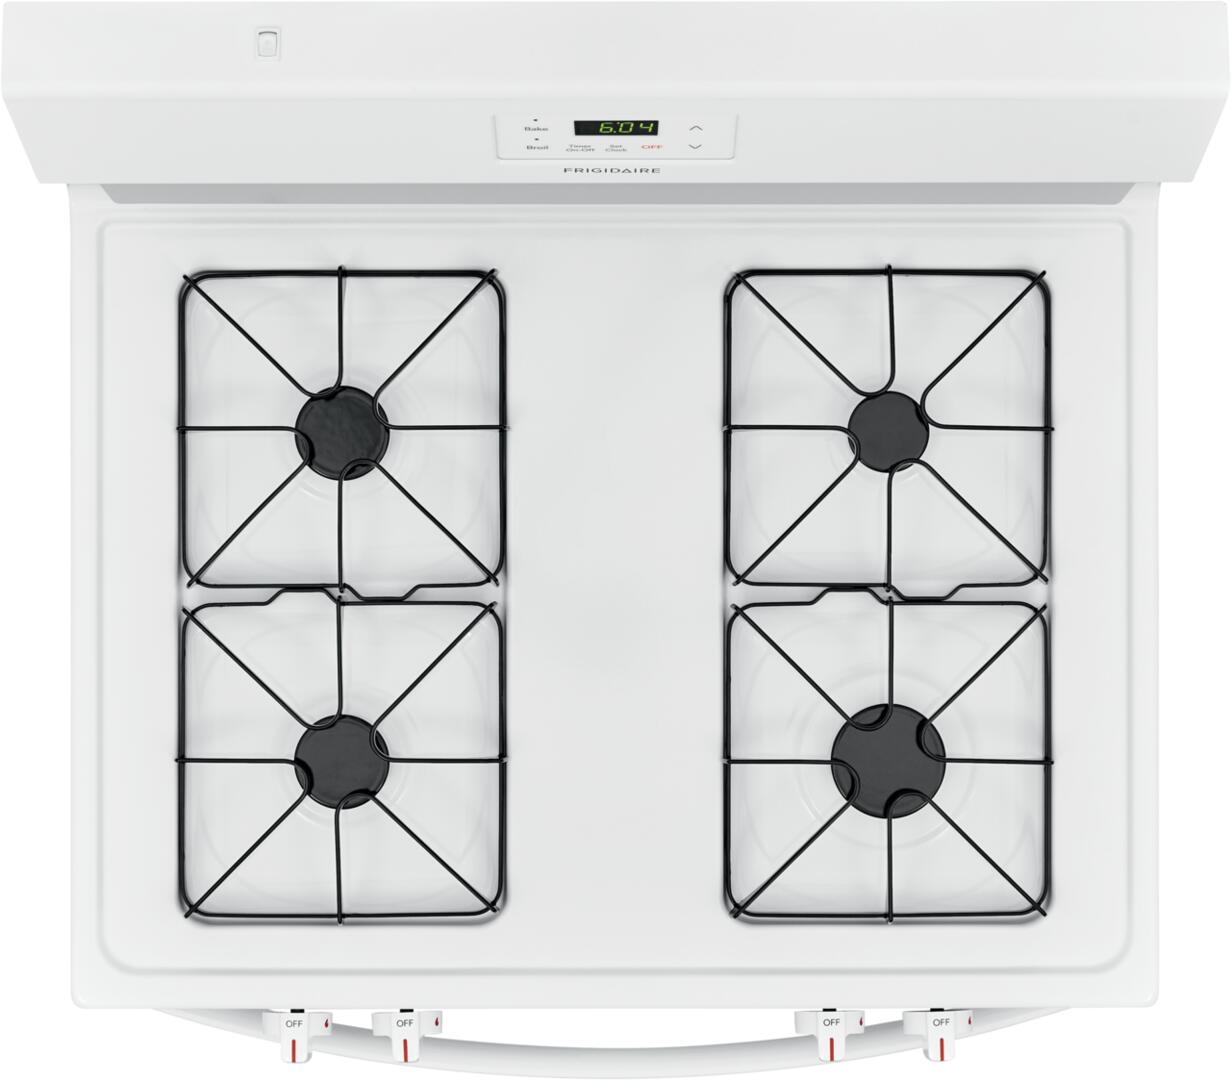 "Frigidaire Oven Range,Natural Gas,White FCRG3015AW" - image 4 of 7